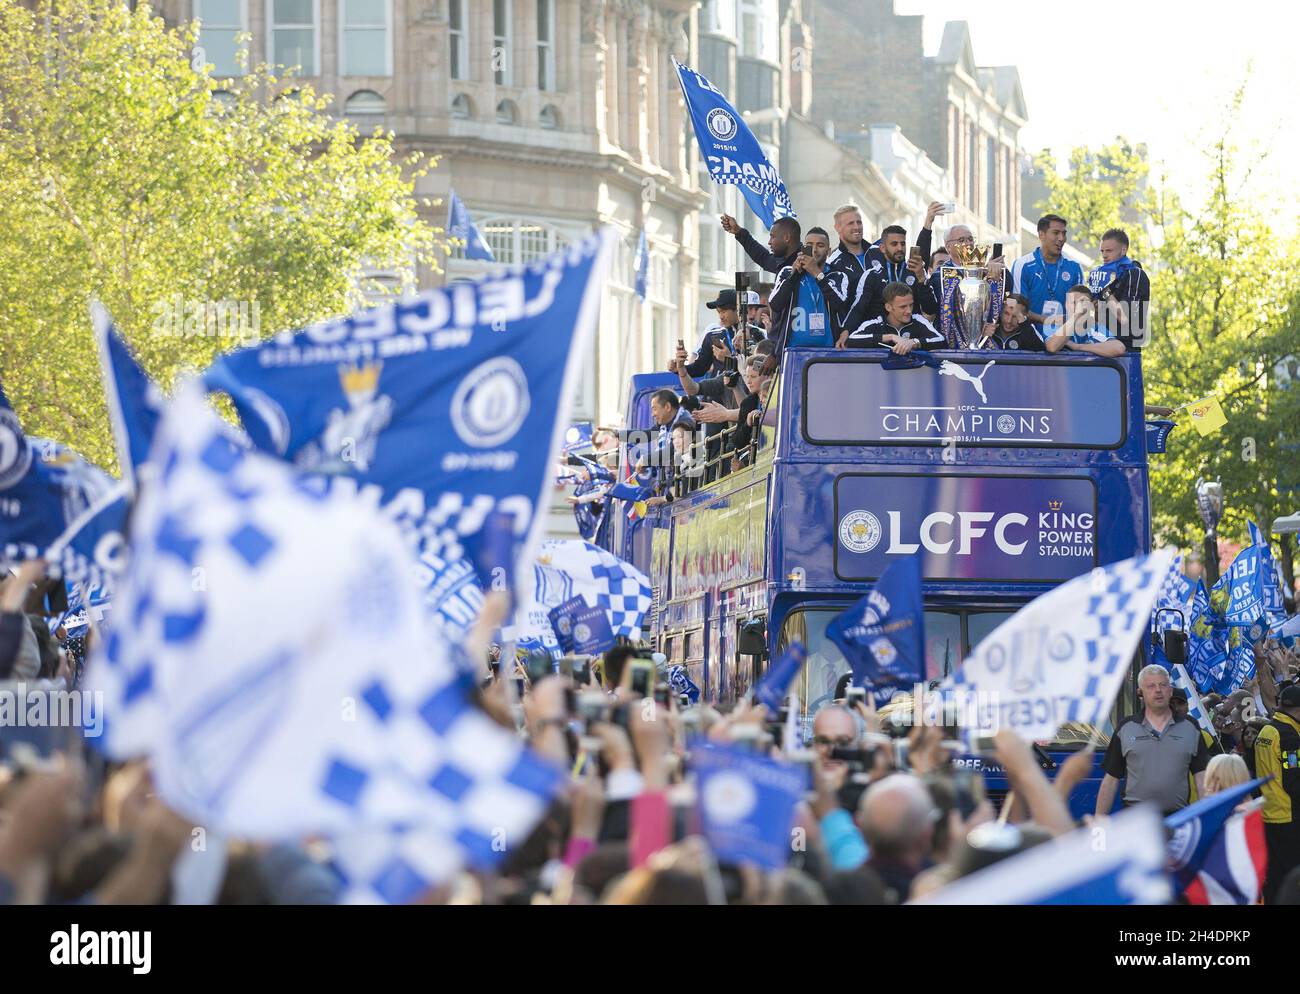 Leicester City FC's victory parade goes through Leicester city centre as the Foxes celebrate winning Barclays Premier League 2015/16 for the first time in their 132-year history on May 16, 2016. Stock Photo